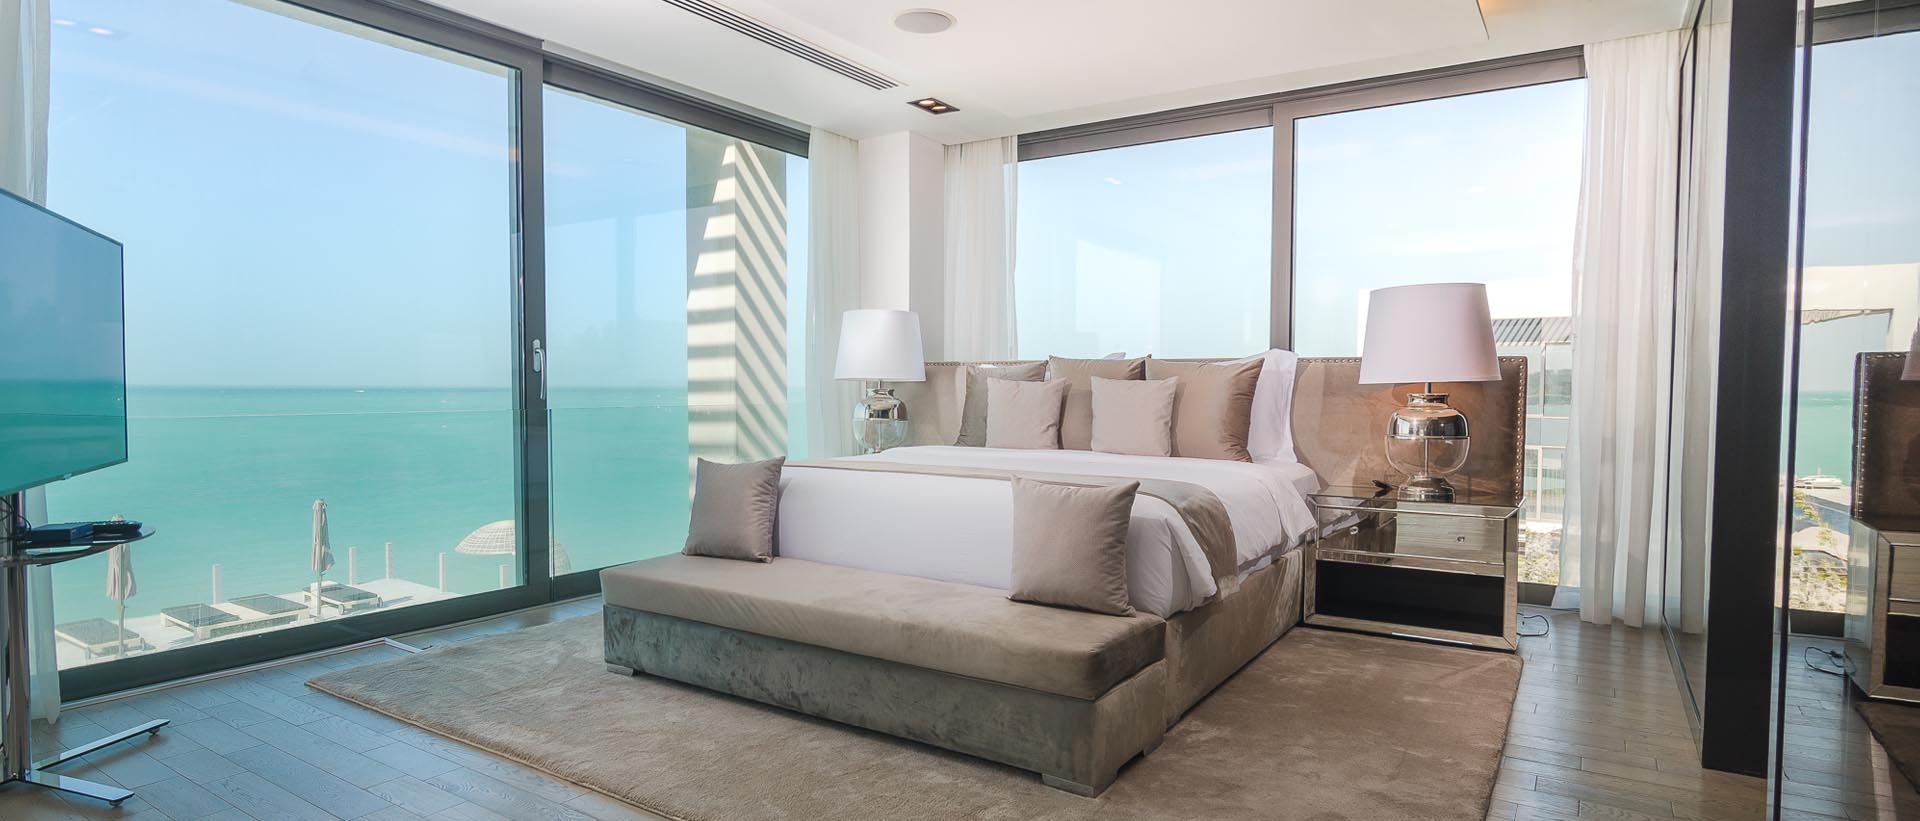 UPSTAIRS GUEST BEDROOM WITH KING BED AND UNRIVALED OCEAN VIEWS